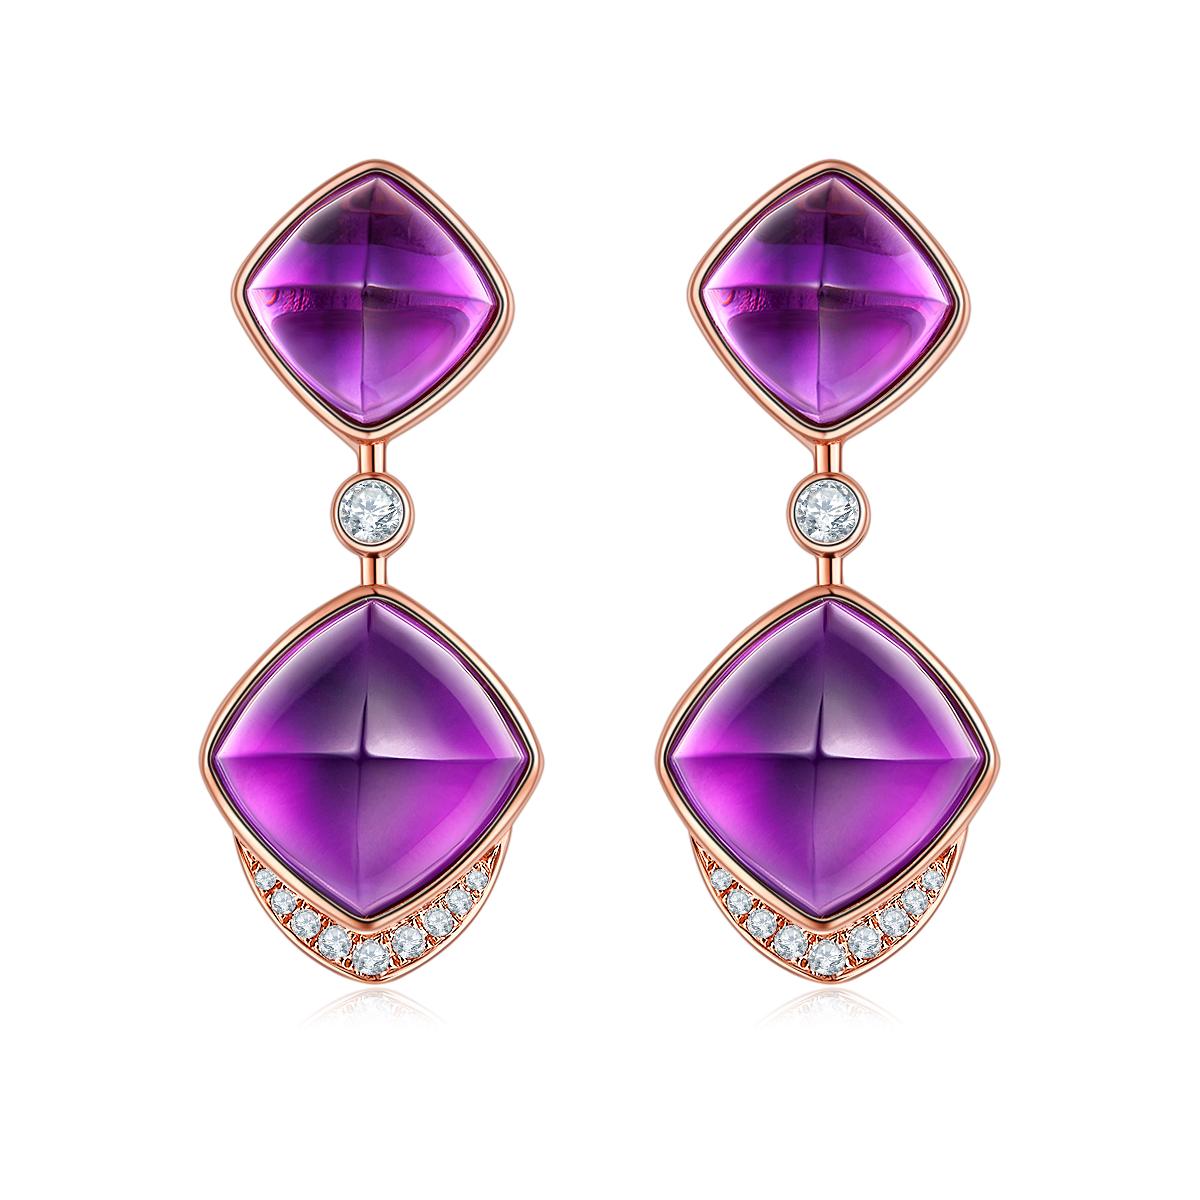 An impressive sugarloaf Amethyst and Diamond earring in 18K Rose Gold. A large sugarloaf Amethyst is suspended below a smaller one connected by a Round Beilliant cut diamond. This configuration allows the earring to swing naturally when the wearer